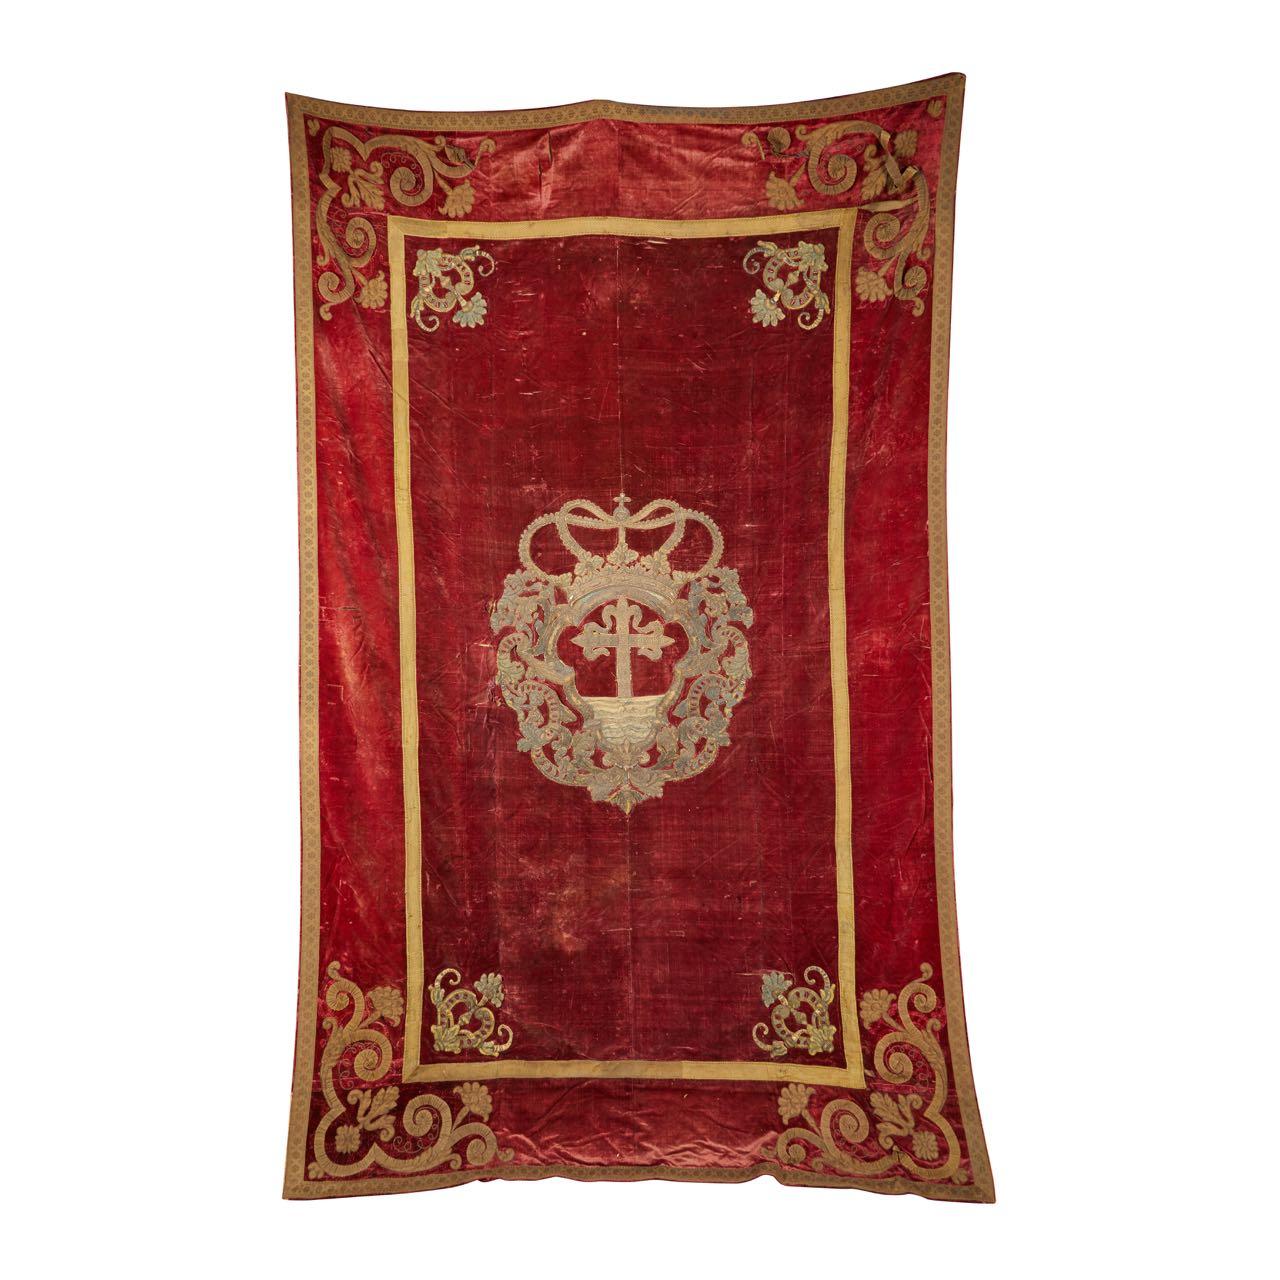 Early 18th Century Red Velvet Venetian Tapestry Embroidered in Gold Trim